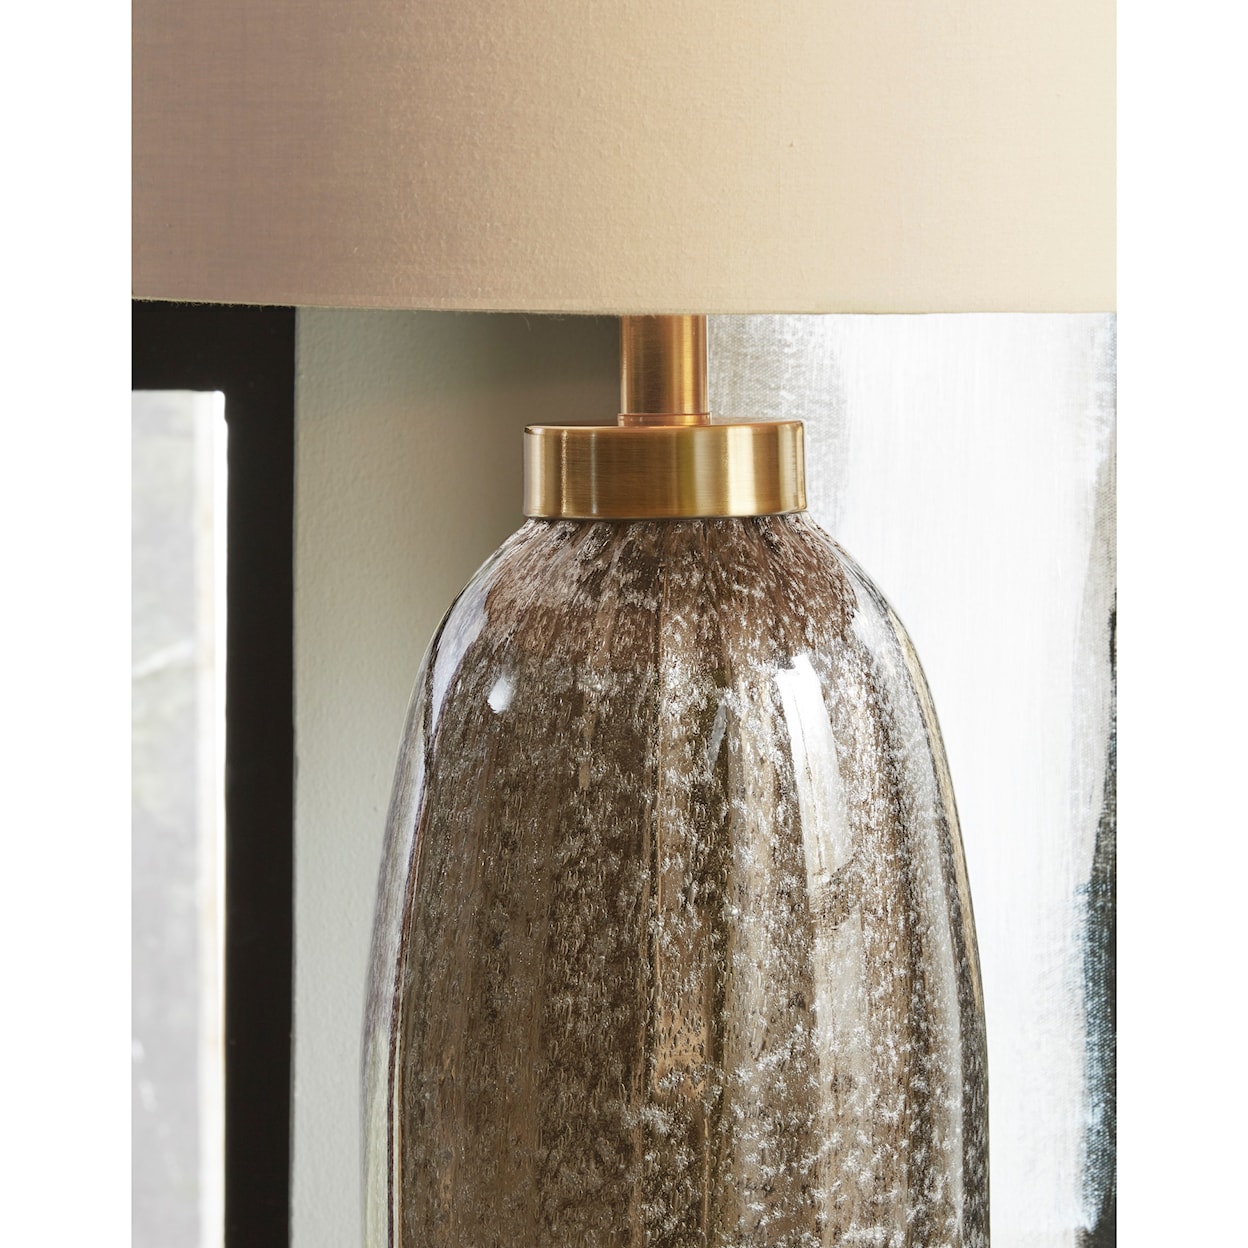 Ashley Furniture Signature Design Lamps - Contemporary Set of 2 Aaronby Taupe Glass Table Lamps